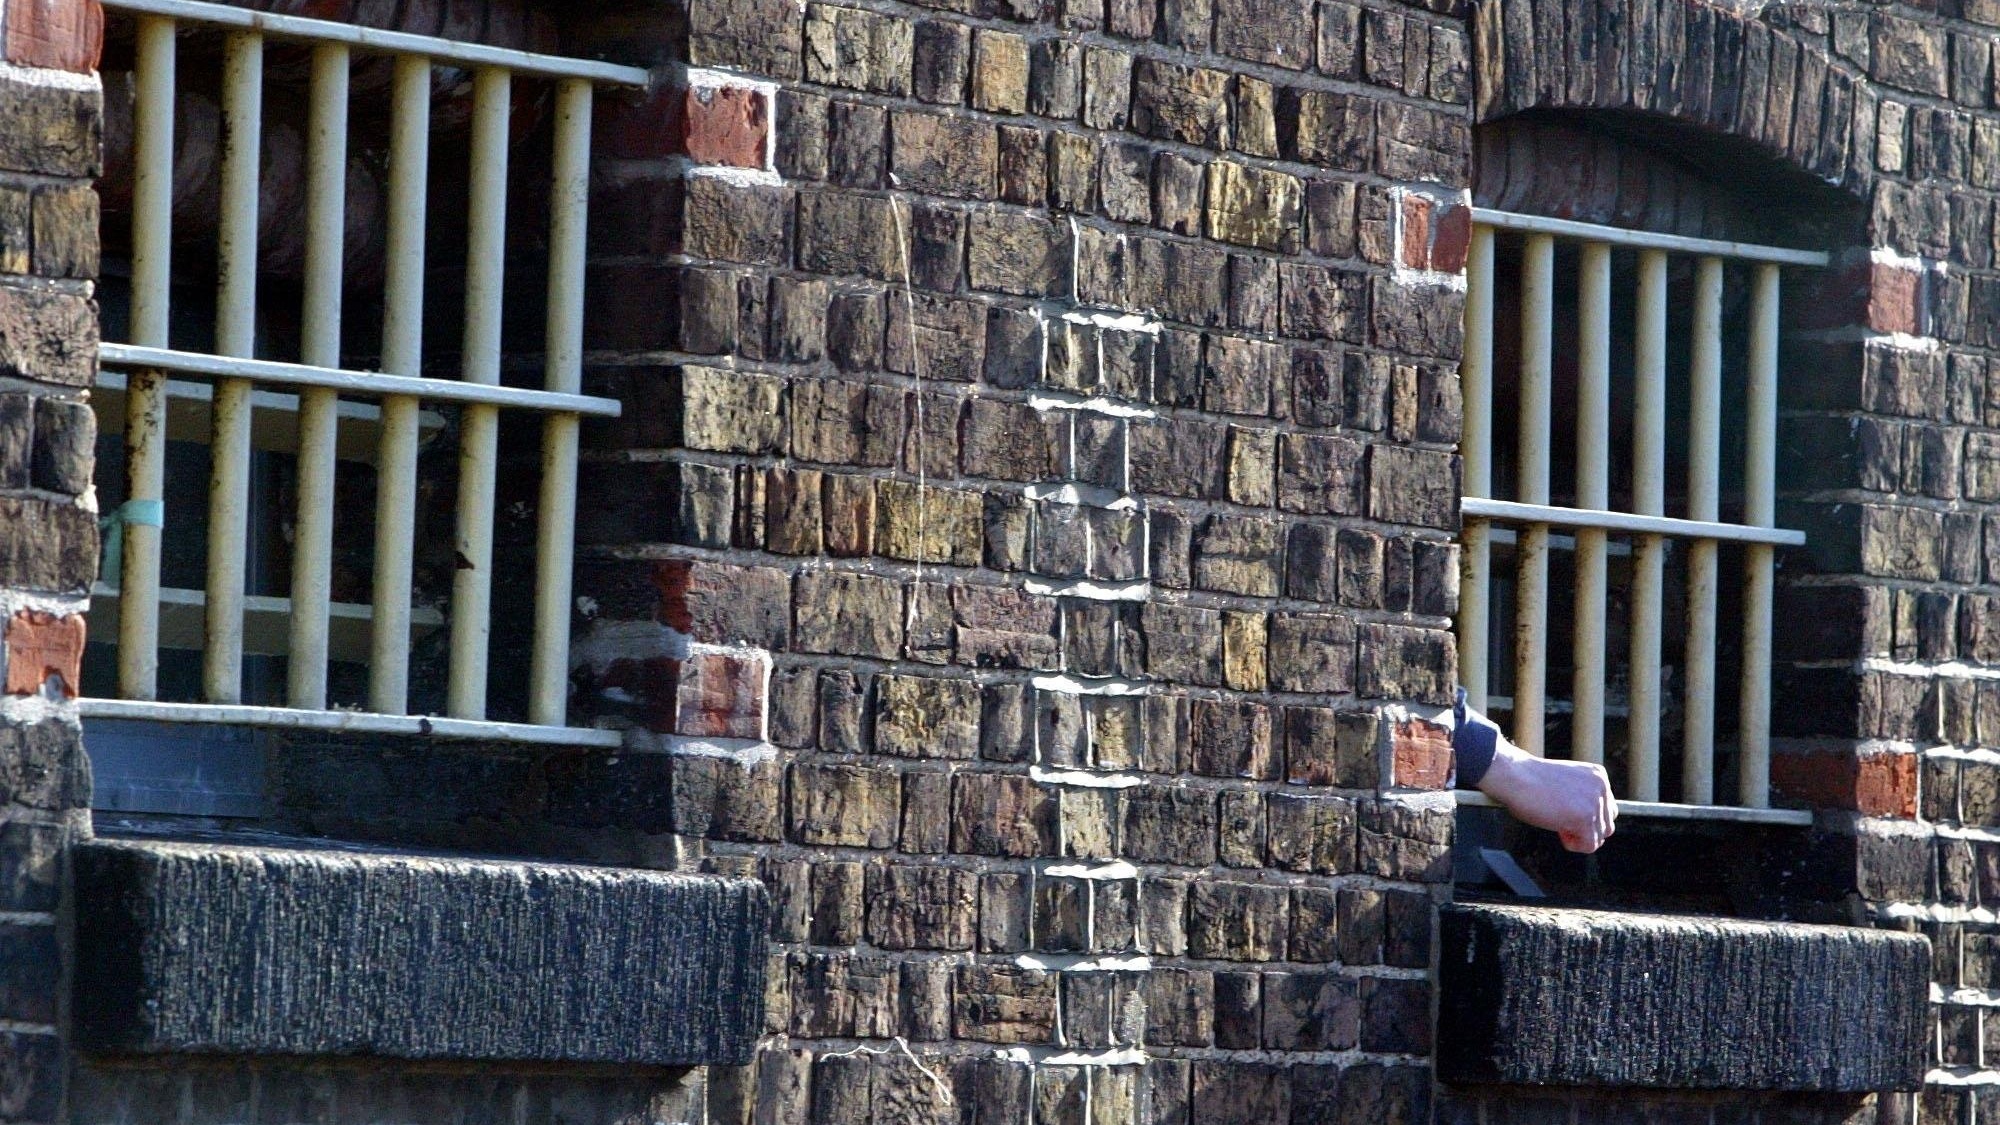 Assaults and self-harm in prisons at record levels - St Helens Star